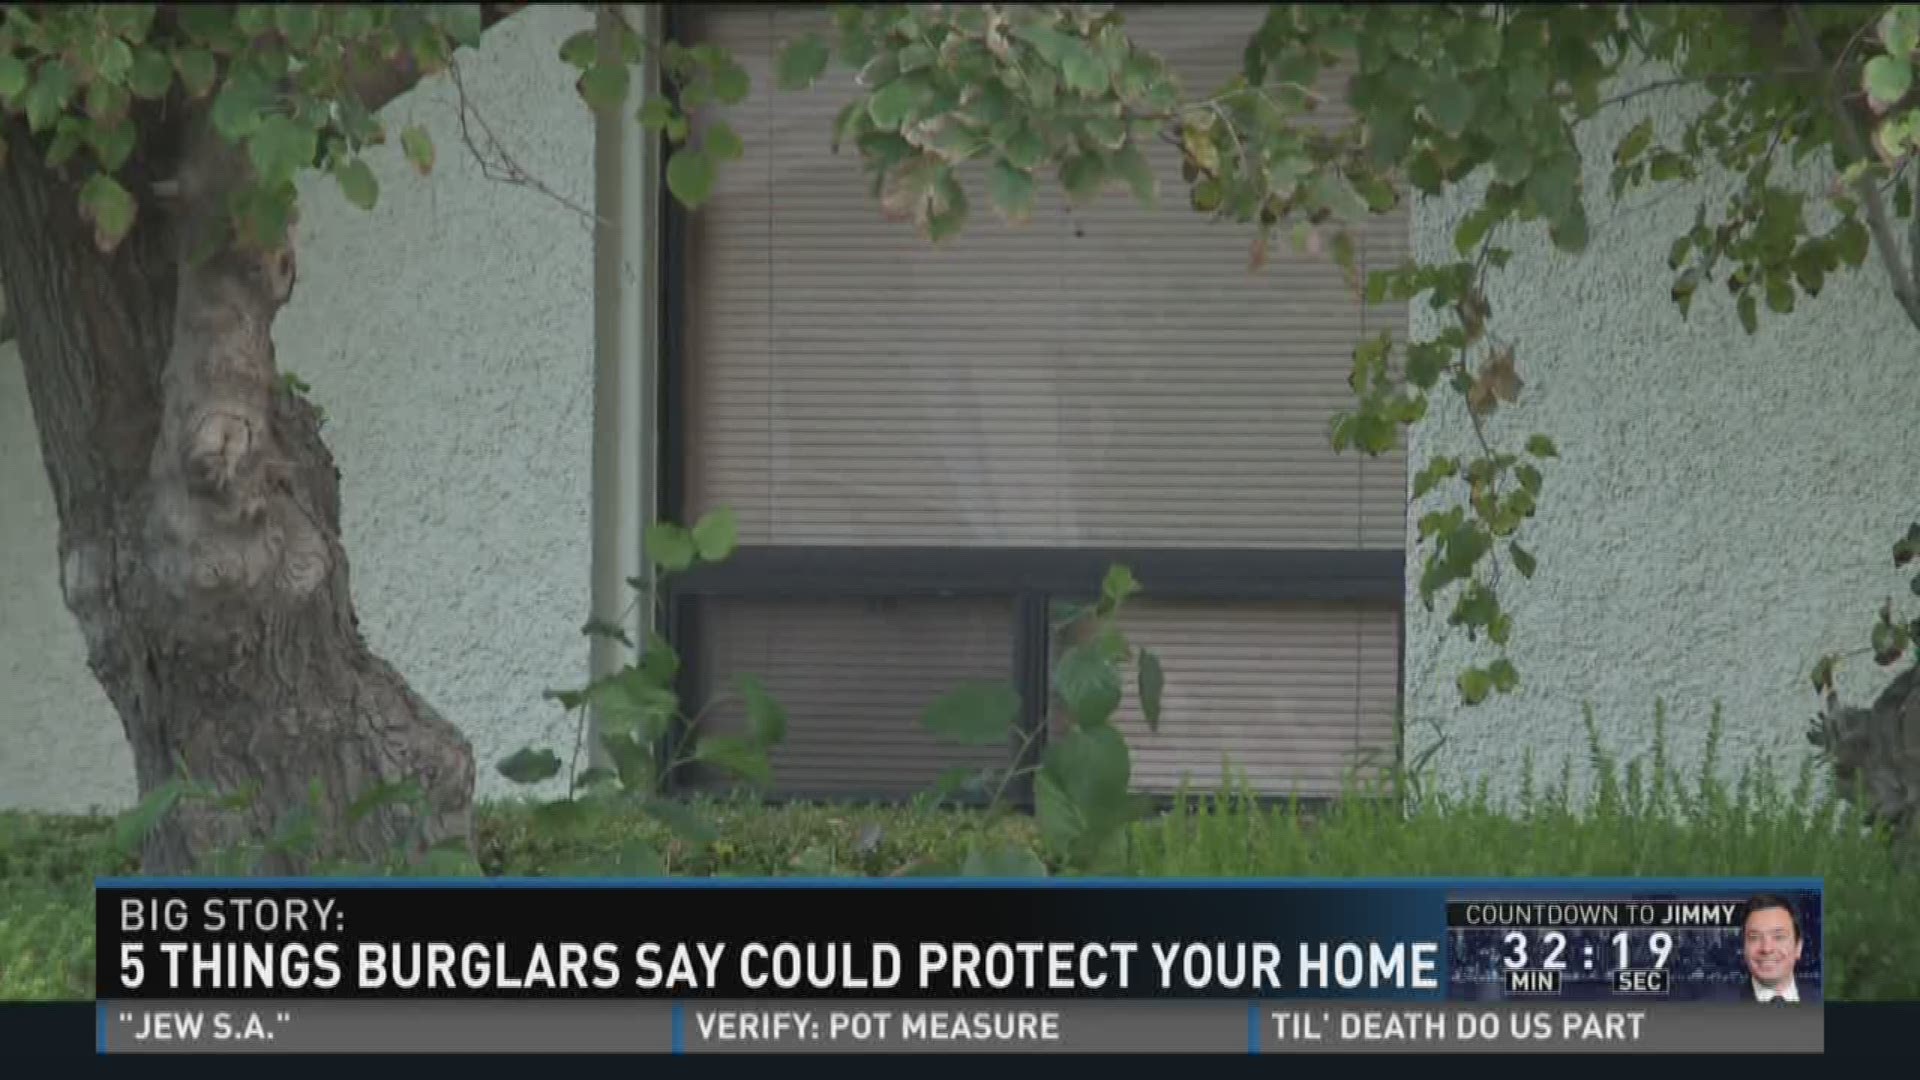 5 things burglars say could protect your home.